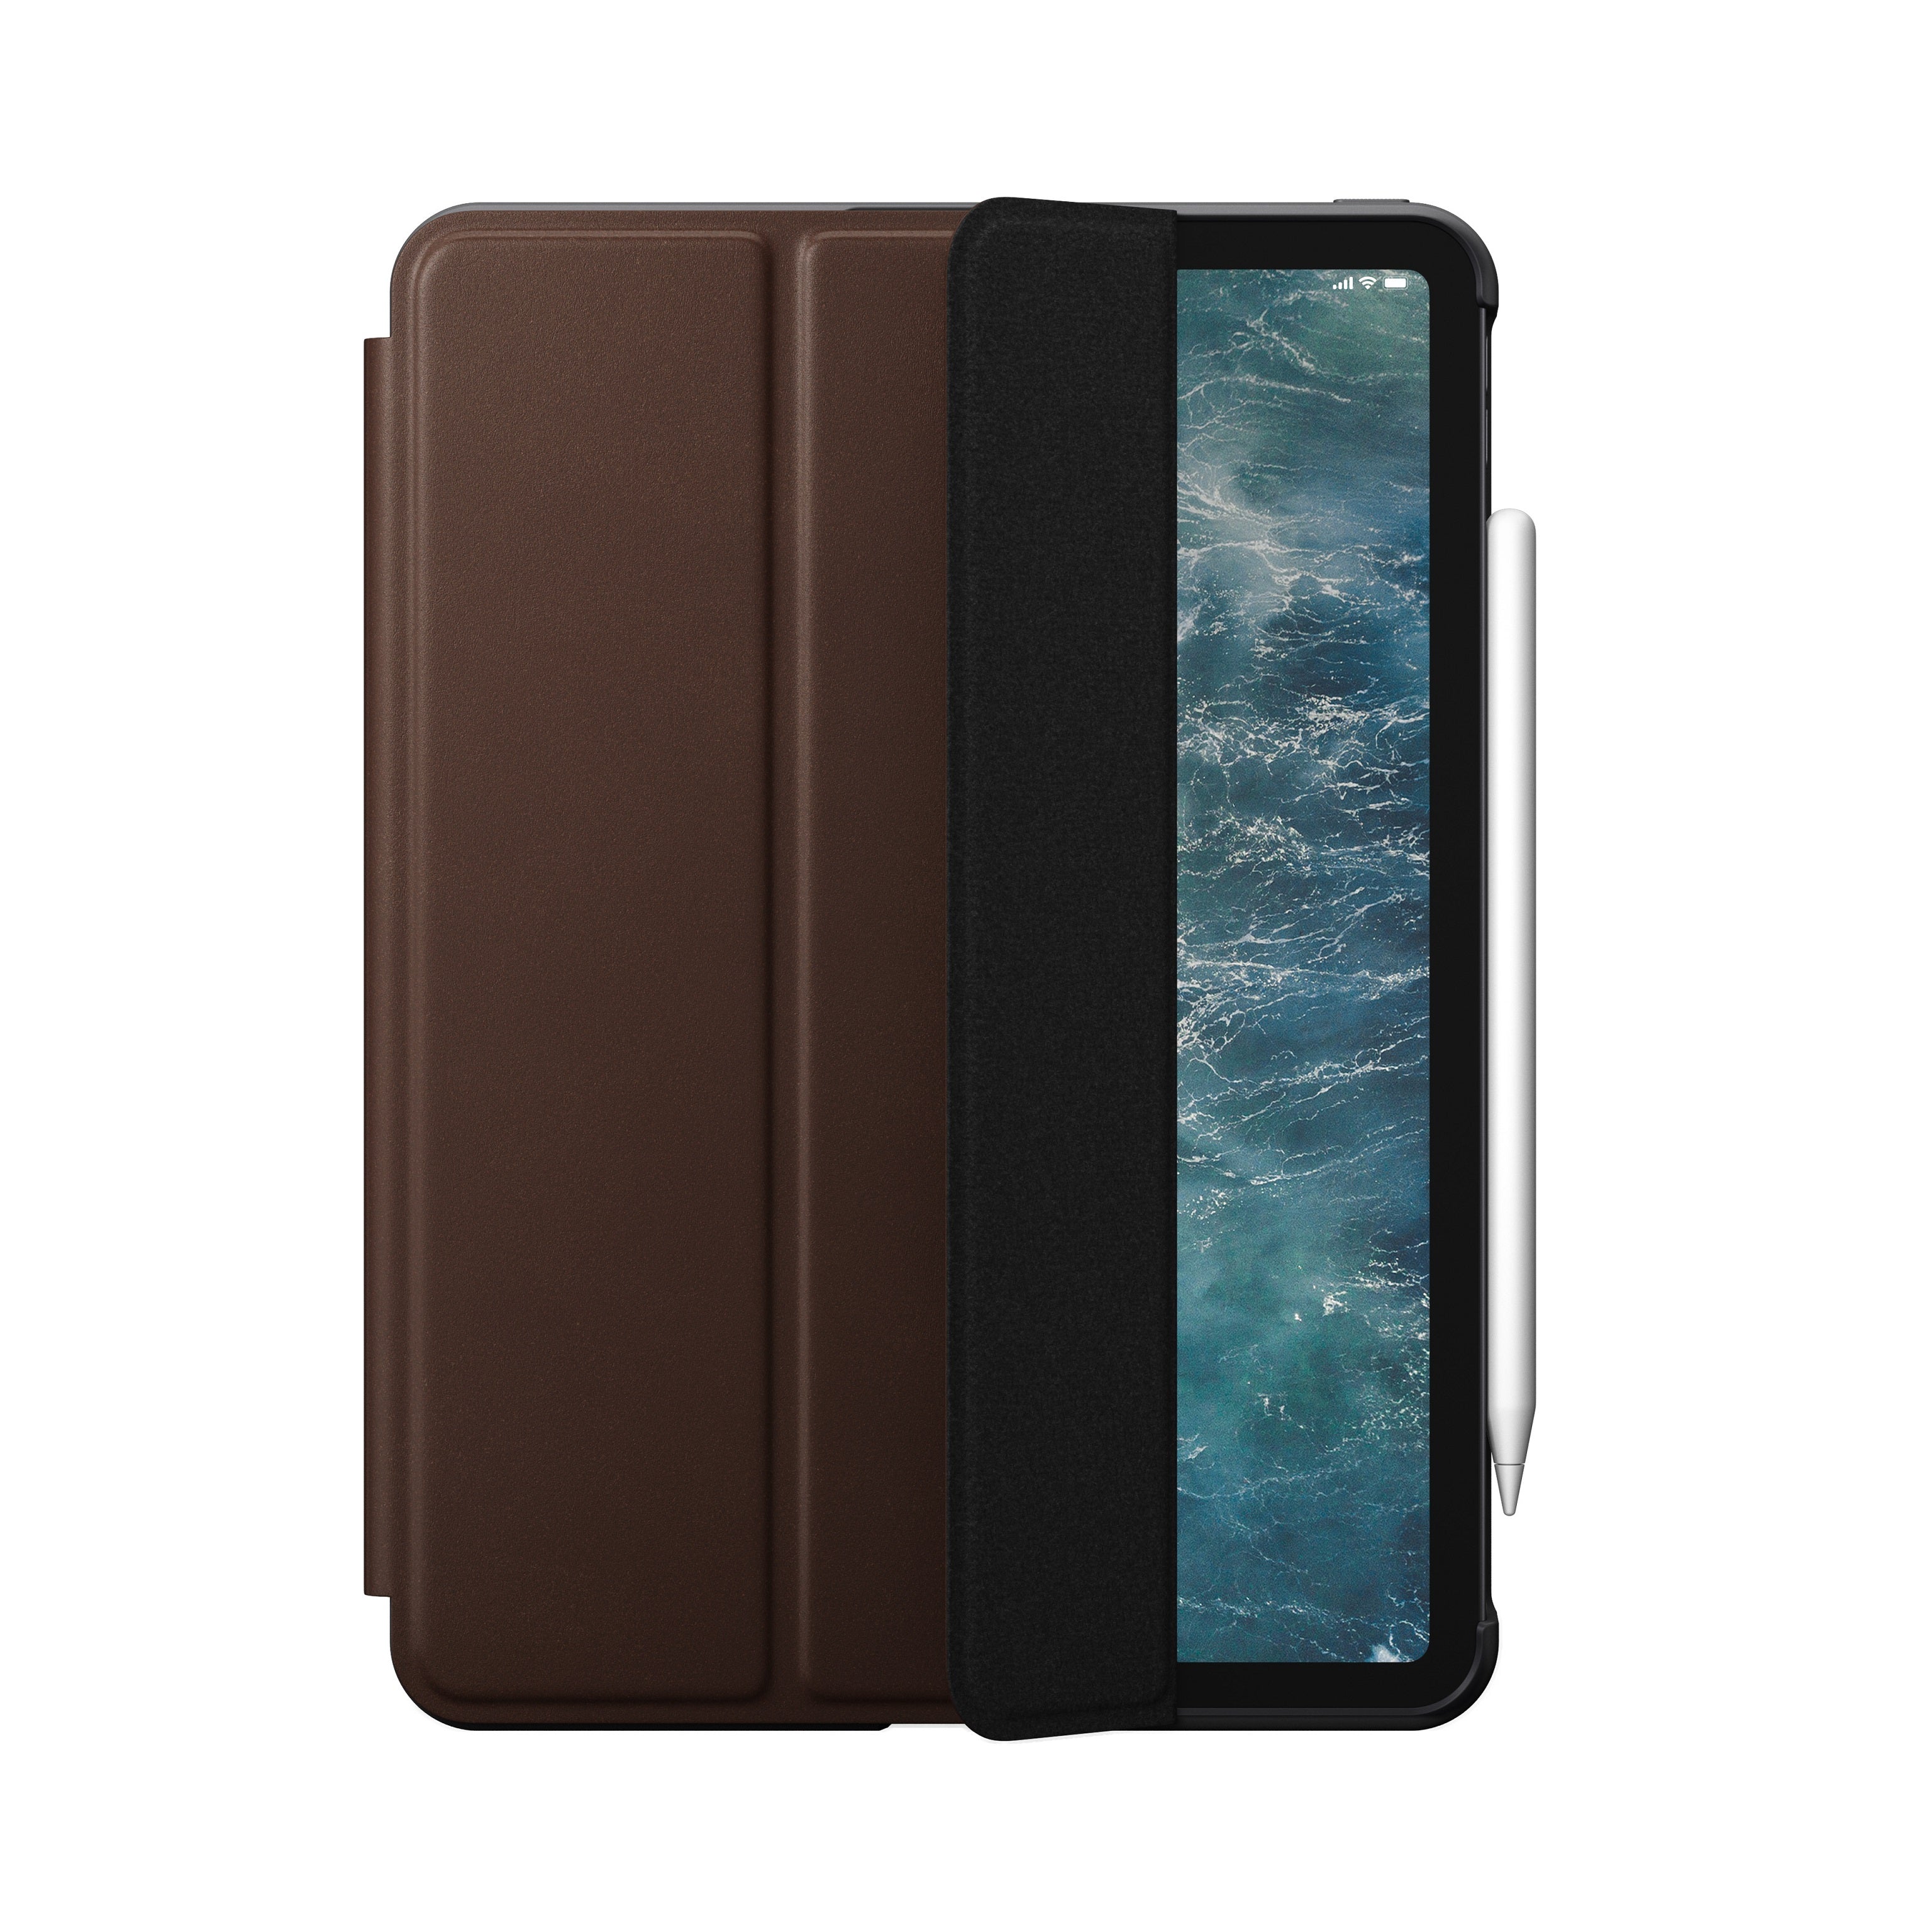 NOMAD Mordern Rugged Folio ECCO Leather Case for iPad Pro 11"(2021) Default NOMAD Rustic Brown 